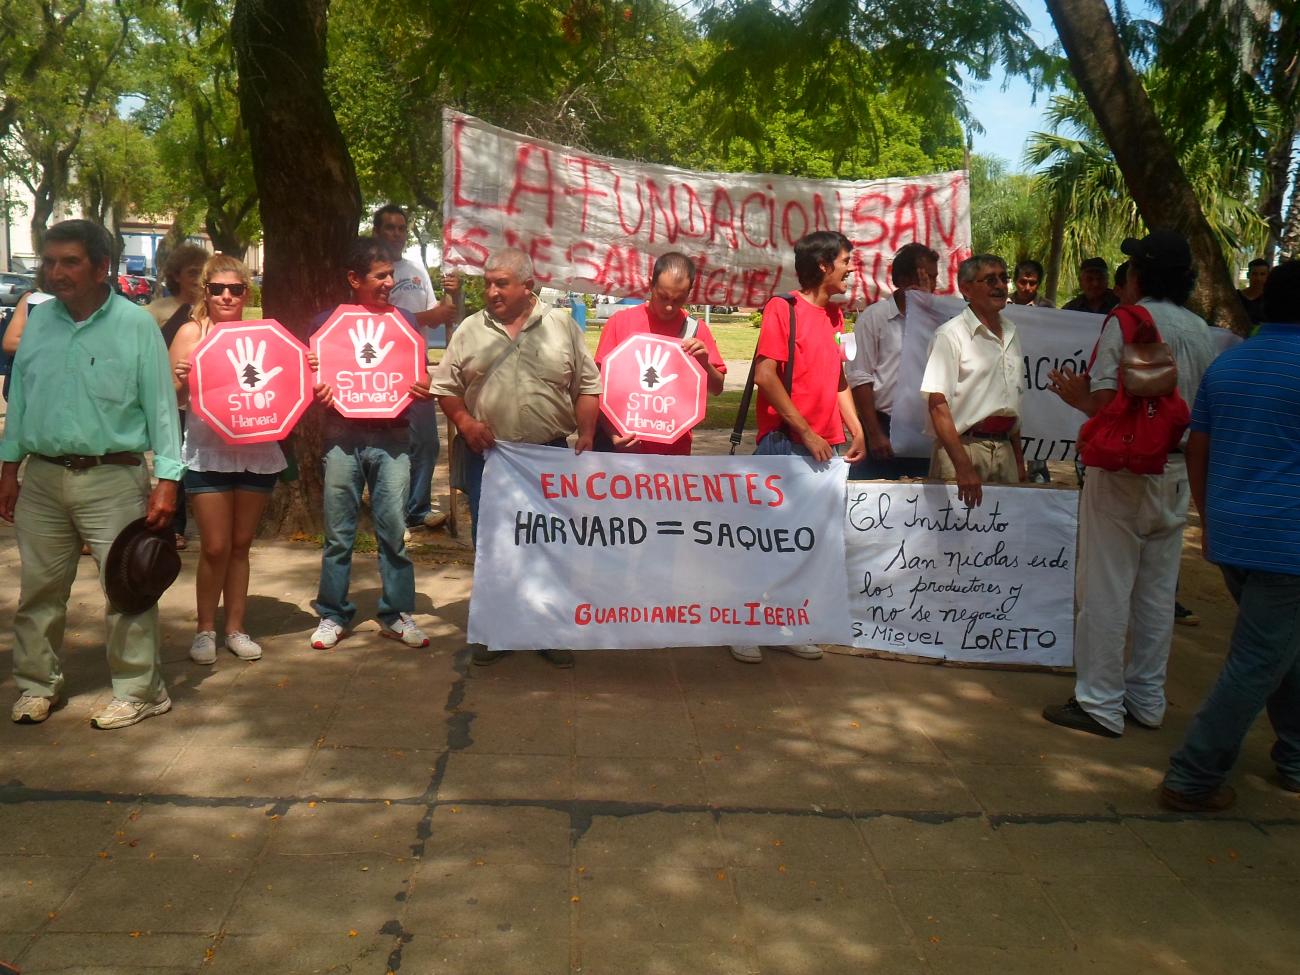 Protest in the capital of Corrientes, Argentina. The sign reads, "In Corrientes, Harvard = looting."